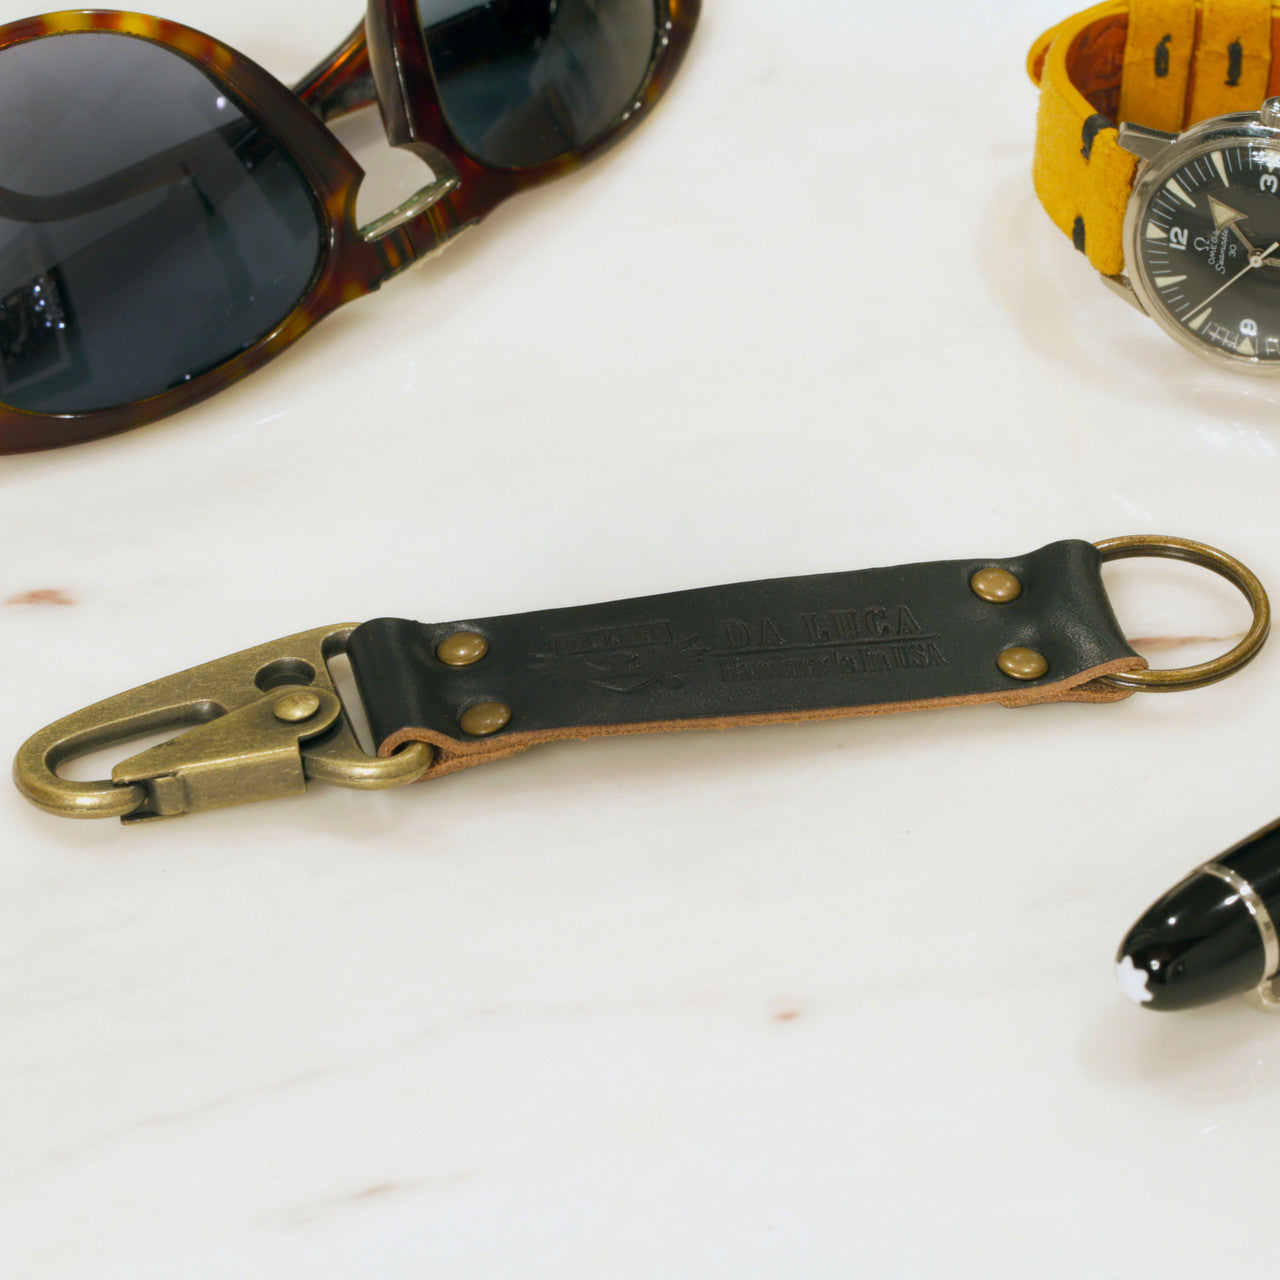 Close View Of Our Keychain Made From Genuine Horween Black Chromexcel Leather and Antique Brass Hardware by DaLuca Straps.